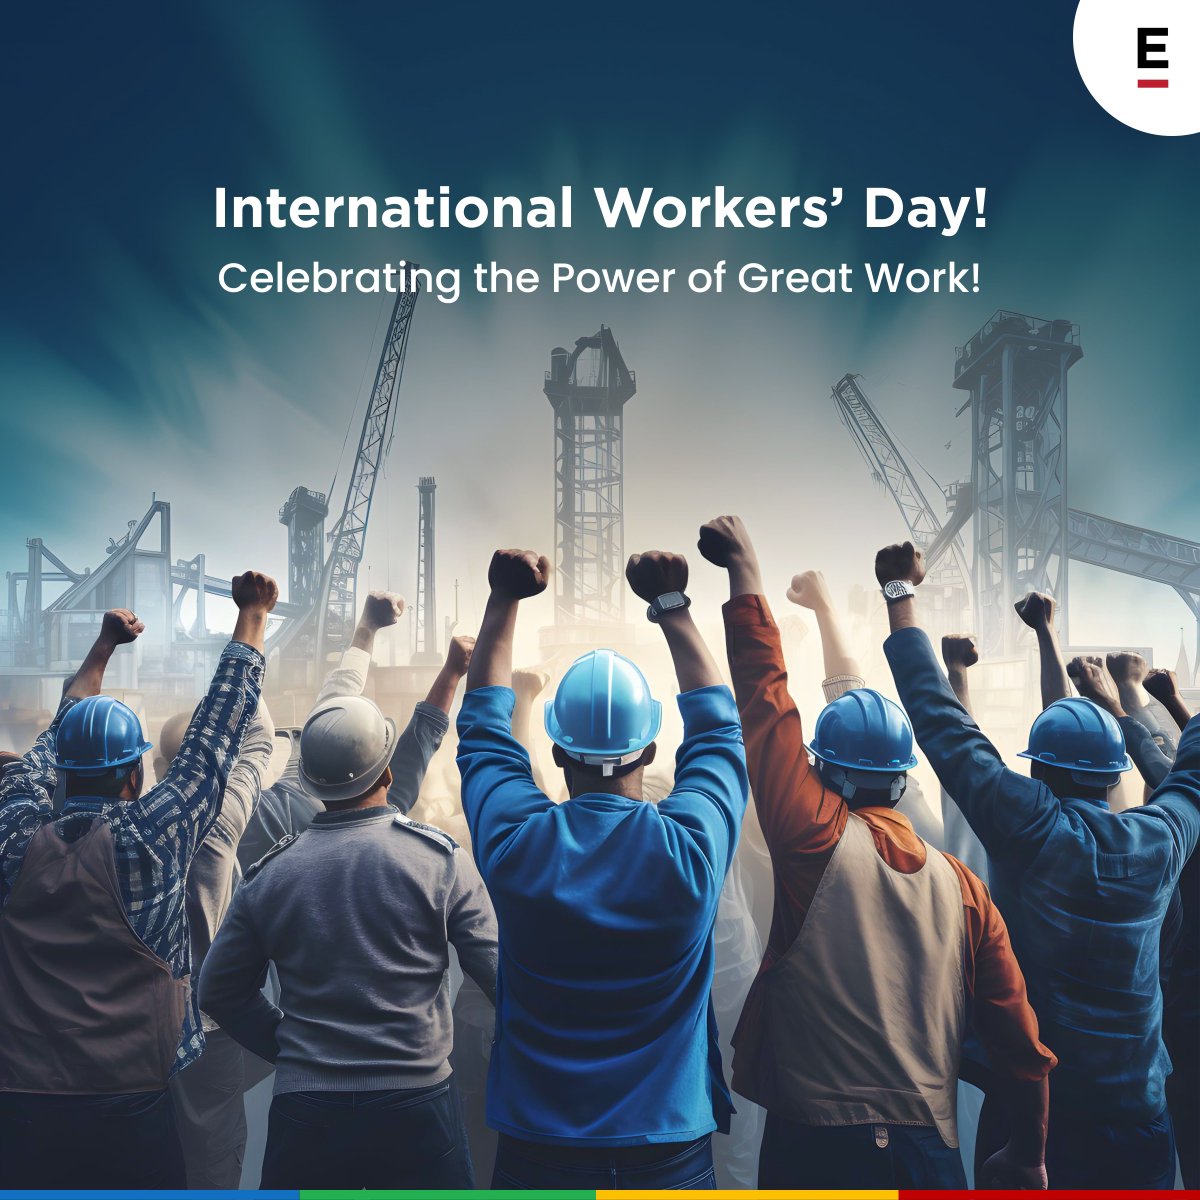 Today, let’s celebrate everyone who contributes their skills and talents to build a stronger, brighter future. Happy International Workers’ Day! 

#InternationalWorkersDay #LaborDay #MayDay #ExtentiaCelebrates #Extentia